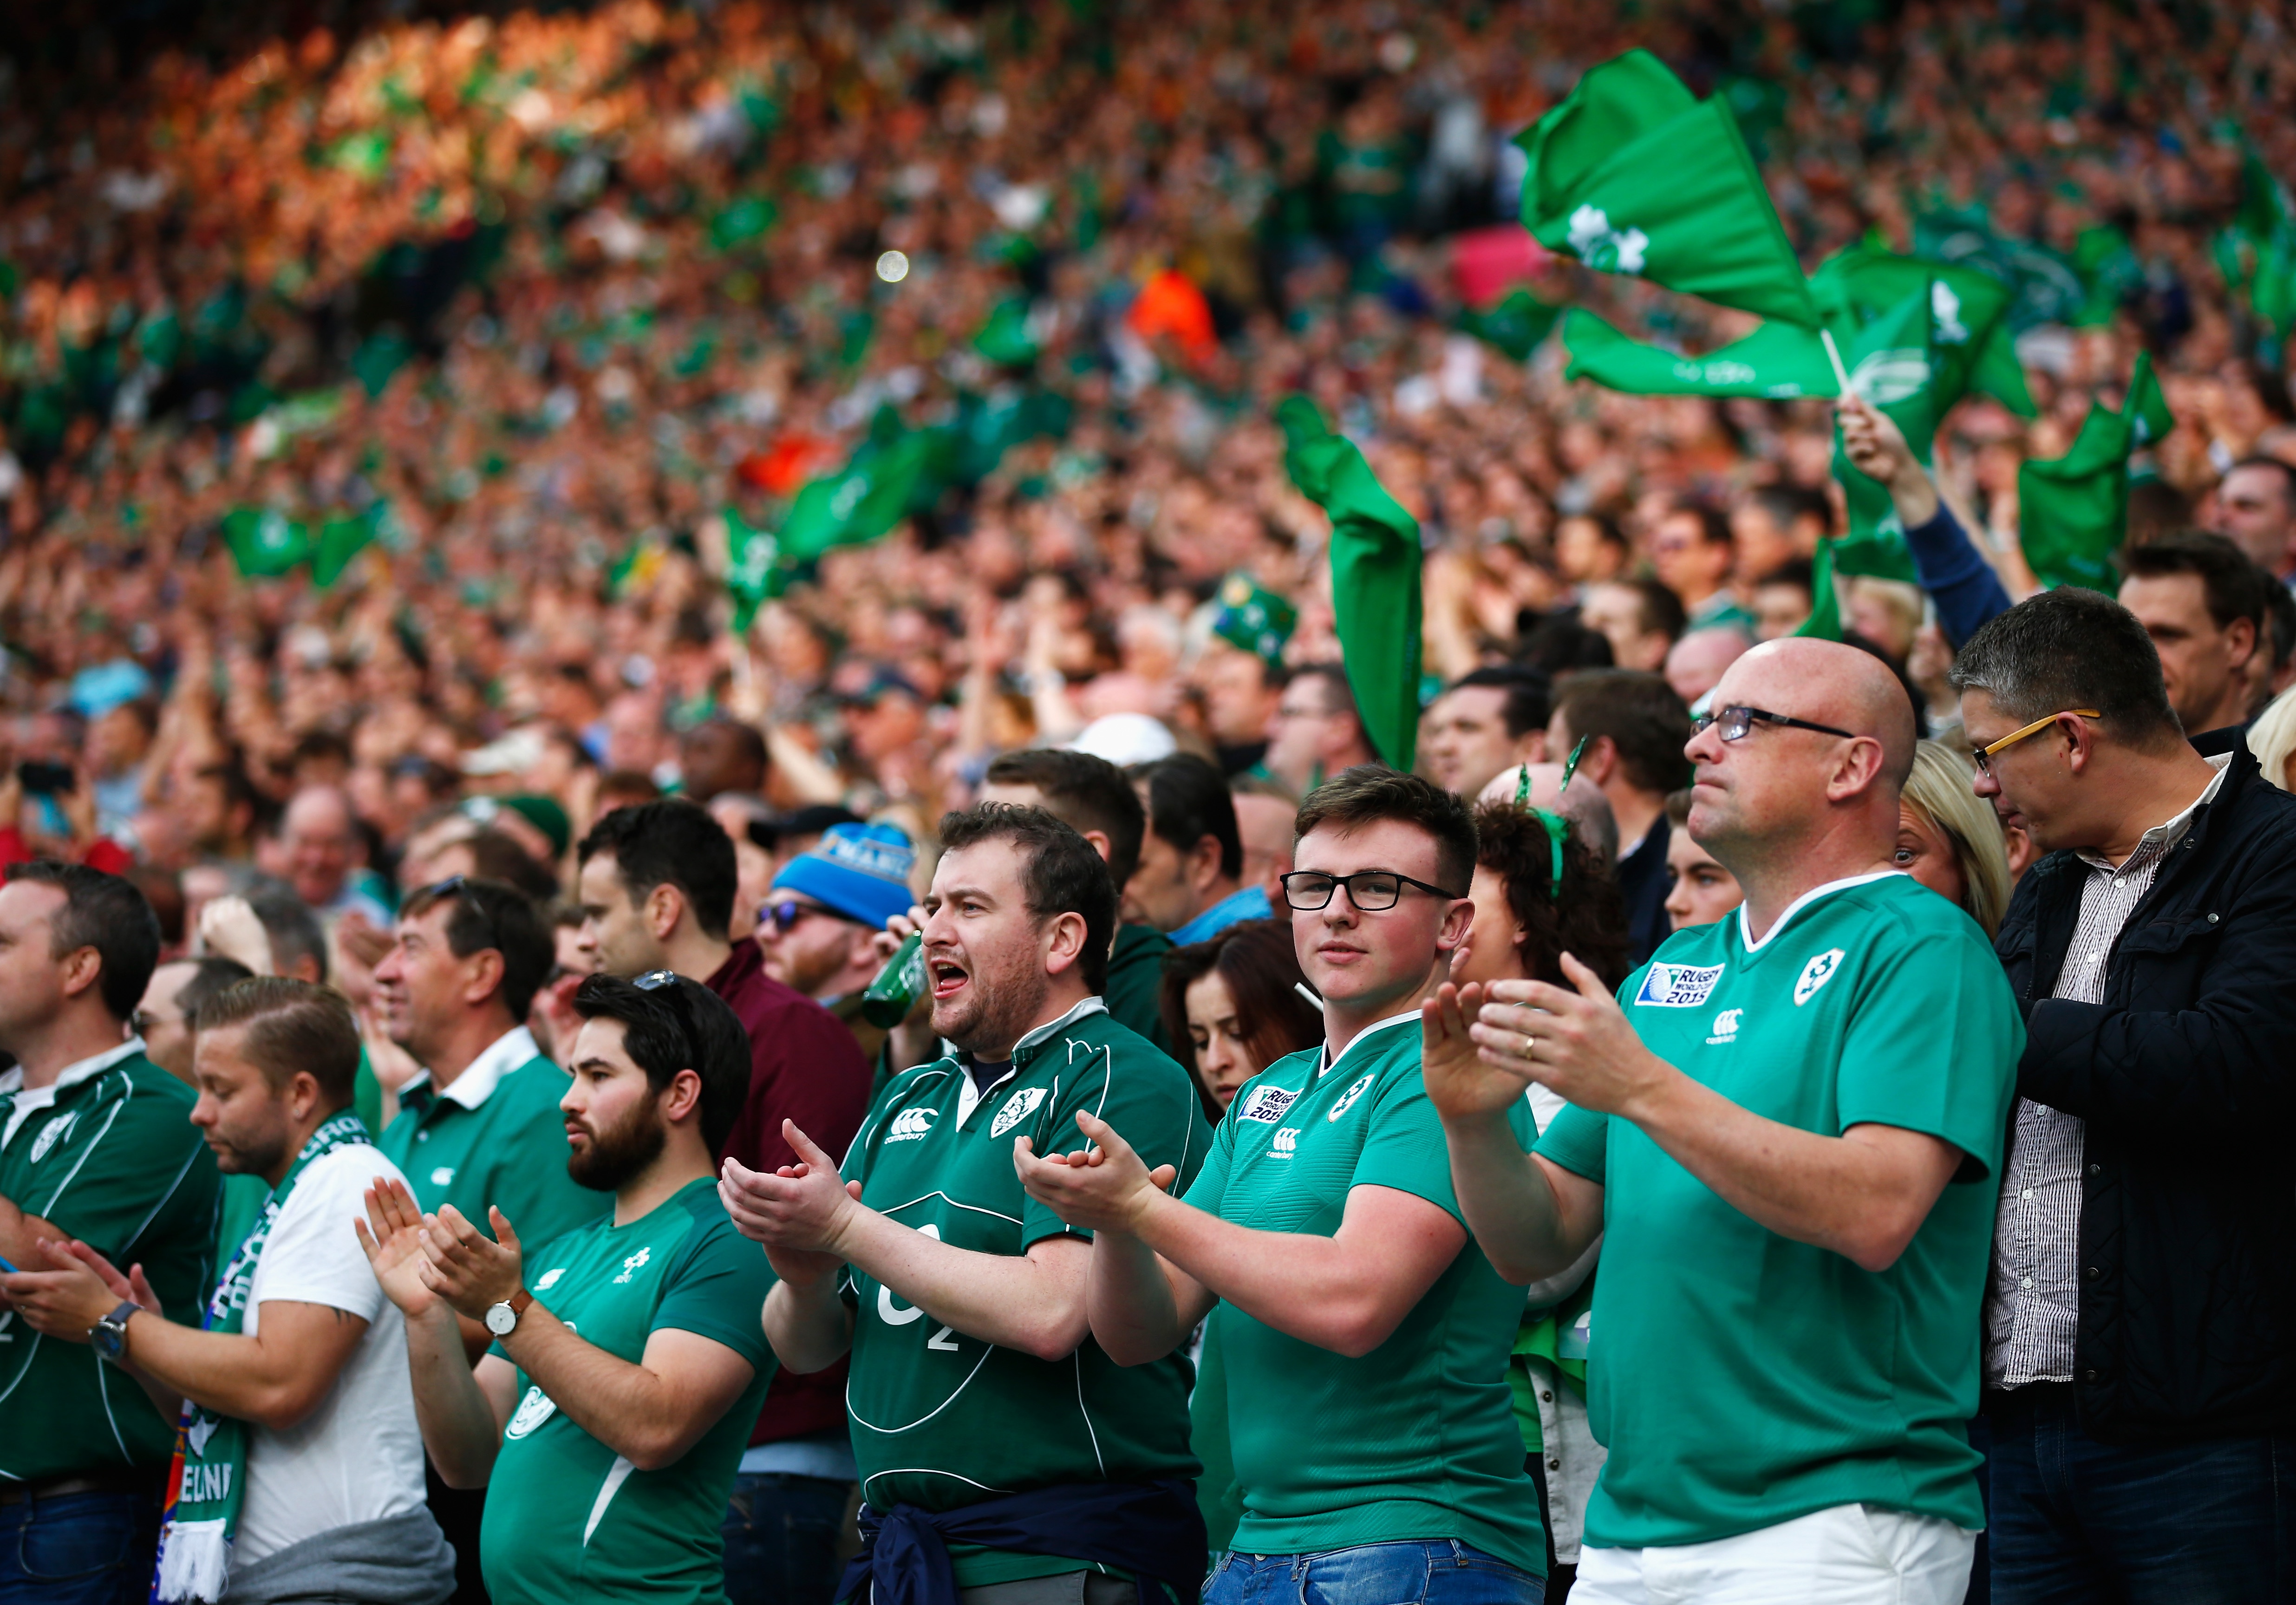 LONDON, ENGLAND - OCTOBER 04: Ireland supporters cheer prior to the 2015 Rugby World Cup Pool D match between Ireland and Italy at the Olympic Stadium on October 4, 2015 in London, United Kingdom. (Photo by Shaun Botterill/Getty Images)